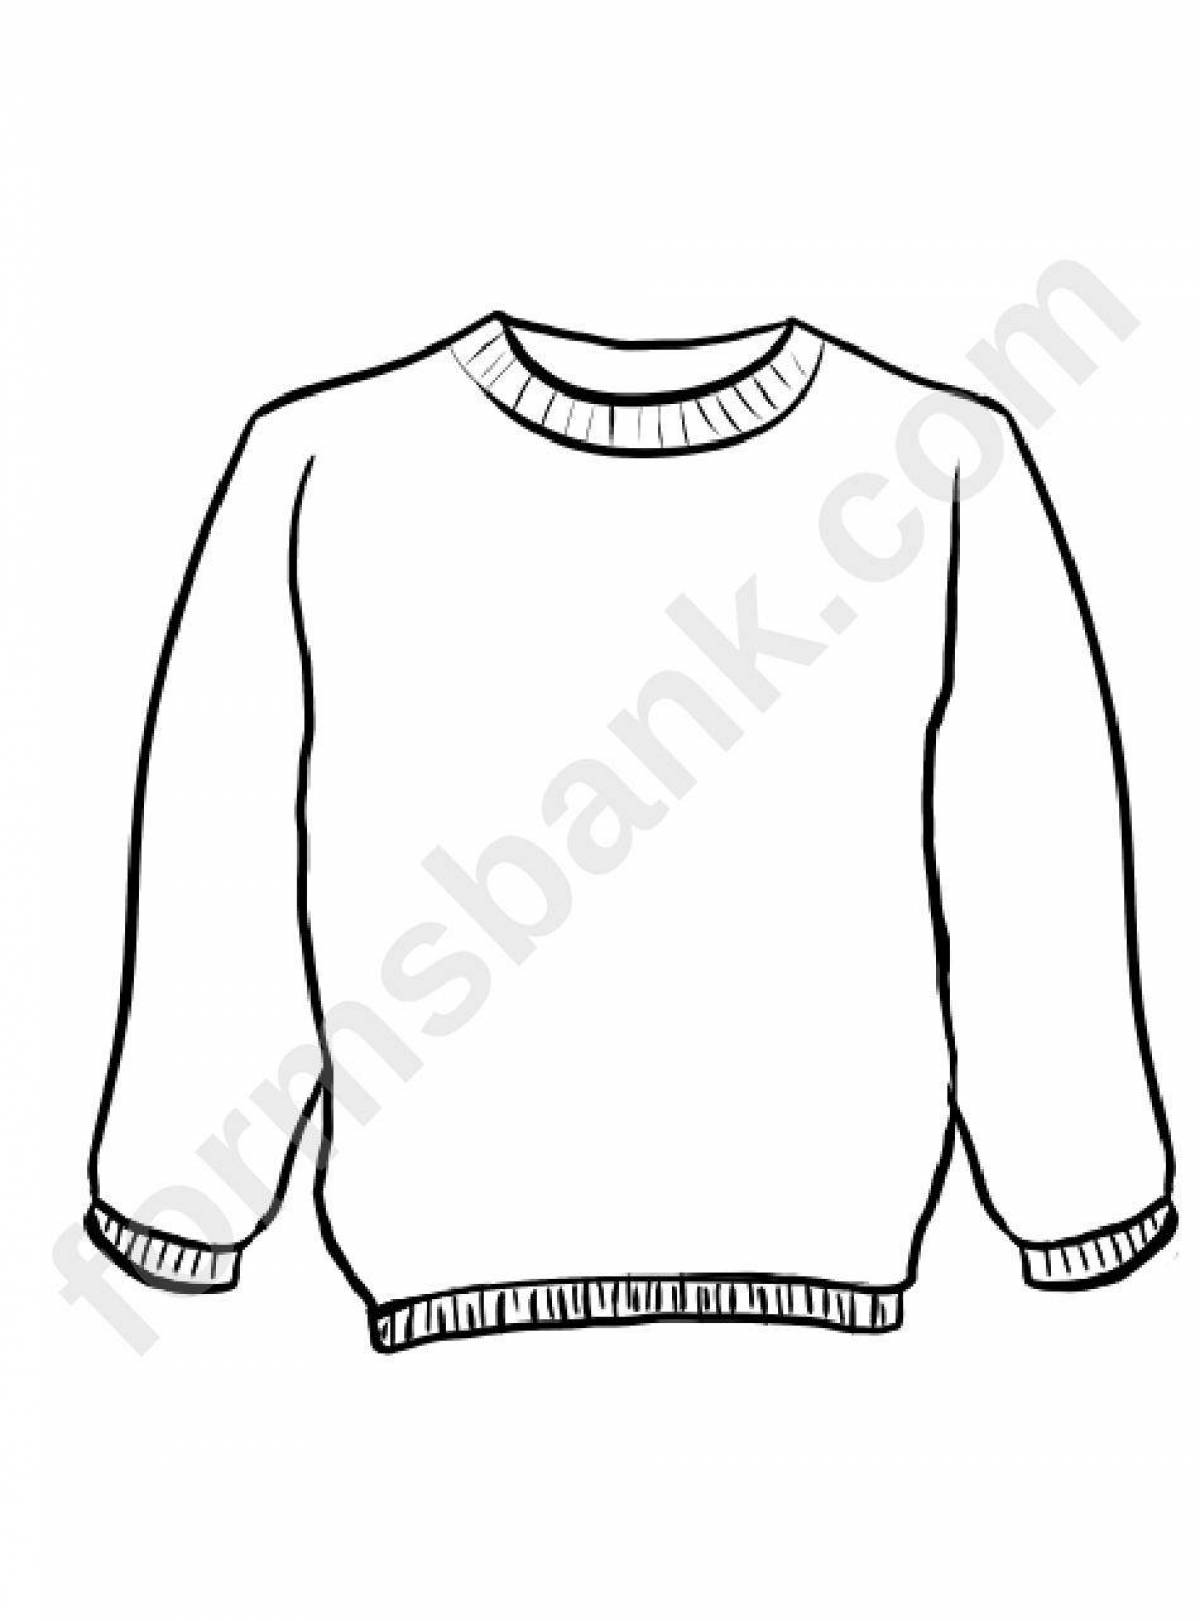 Rampant jumper coloring page